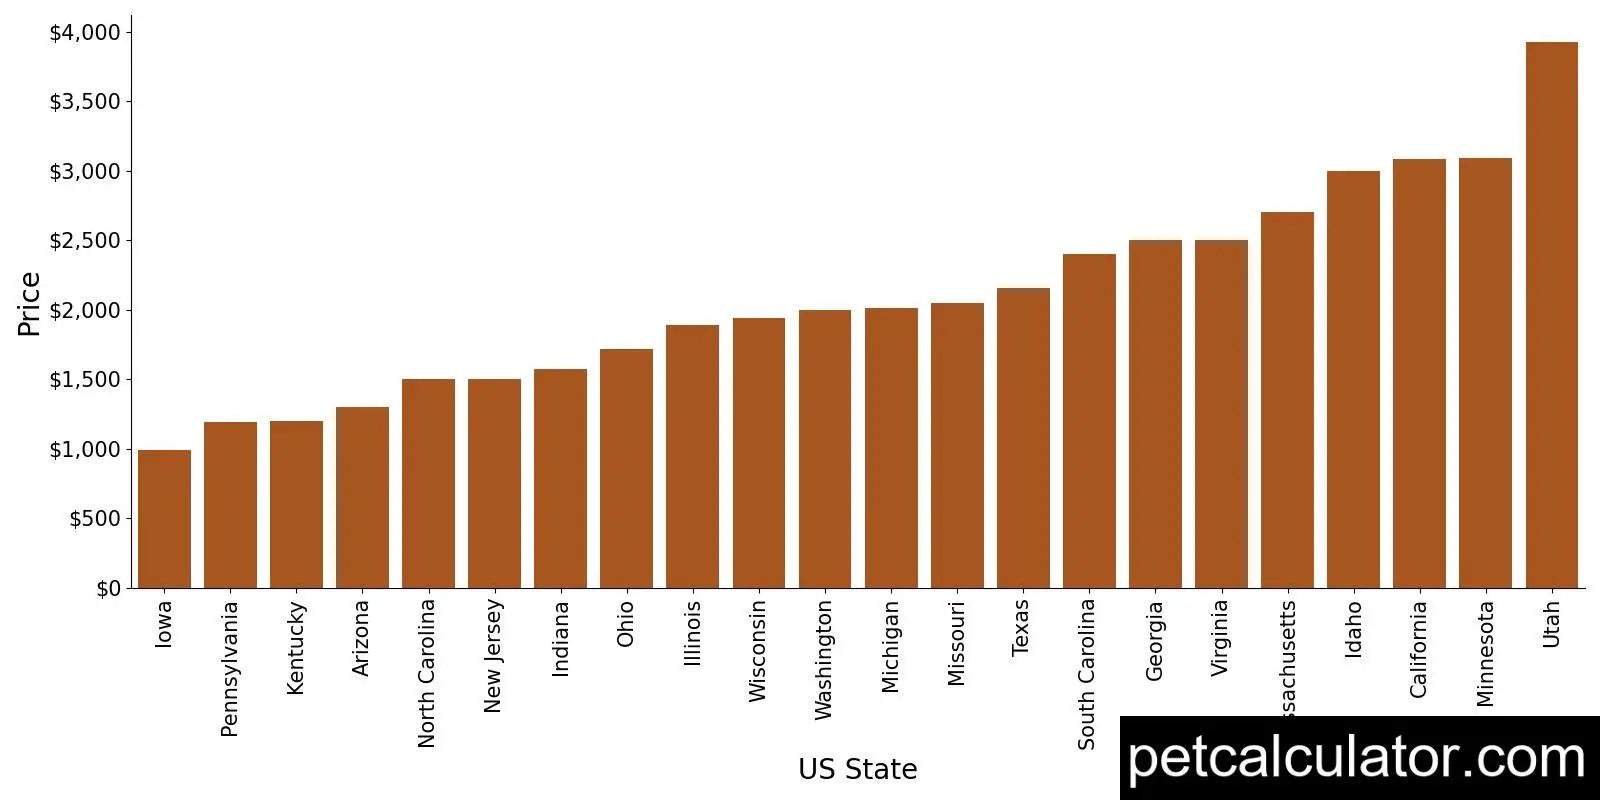 Price of Miniature Golden Retriever by US State 